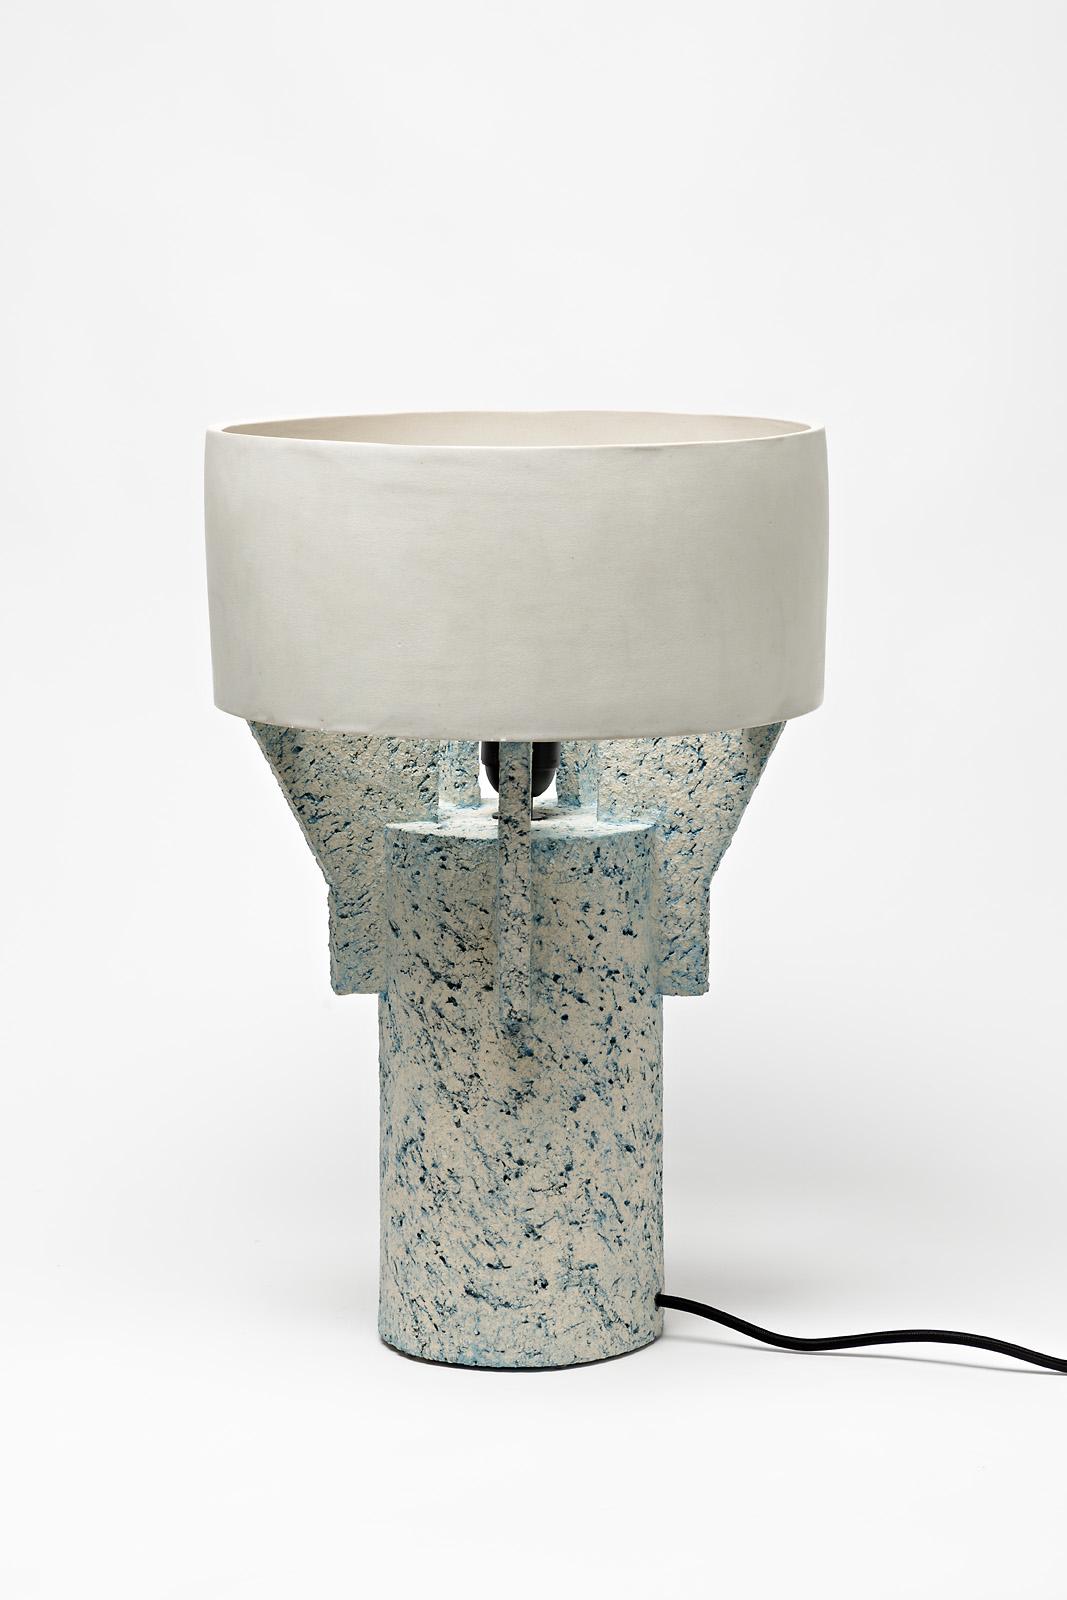 French Ceramic Table Lamp by Denis Castaing with Withe Glaze Decoration, 2019